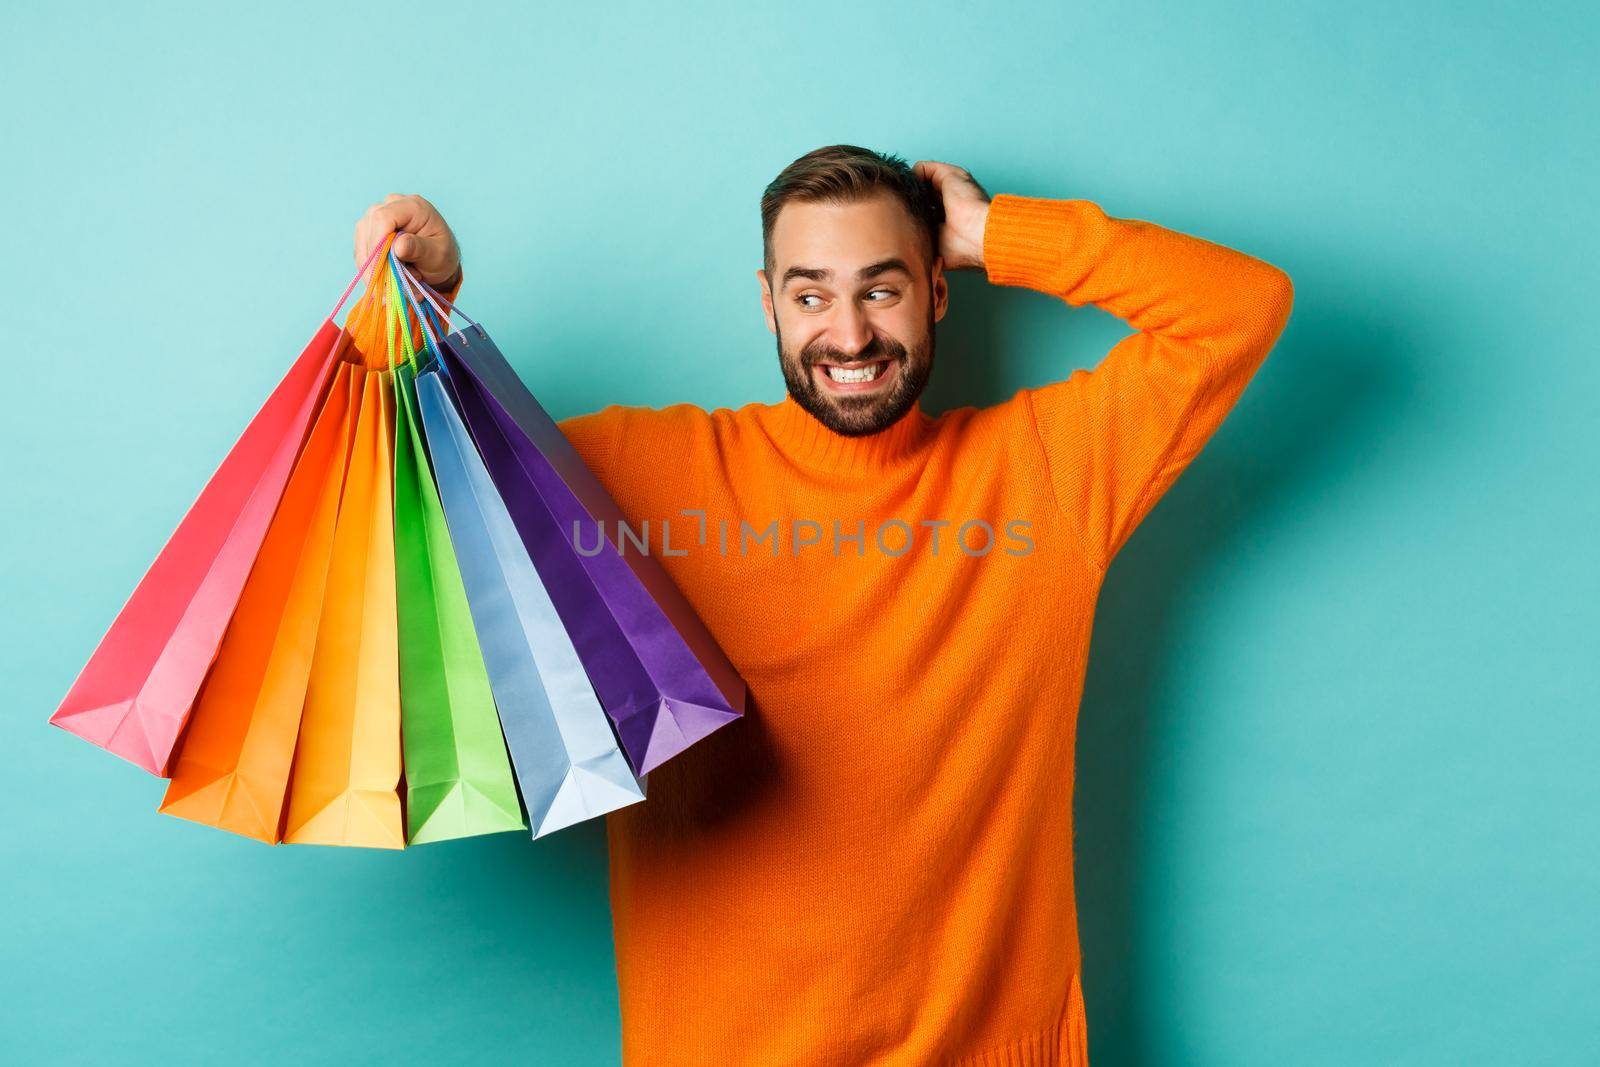 Handsome young man looking awkward and scratching head, staring at shopping bags with gifts, standing over turquoise background.